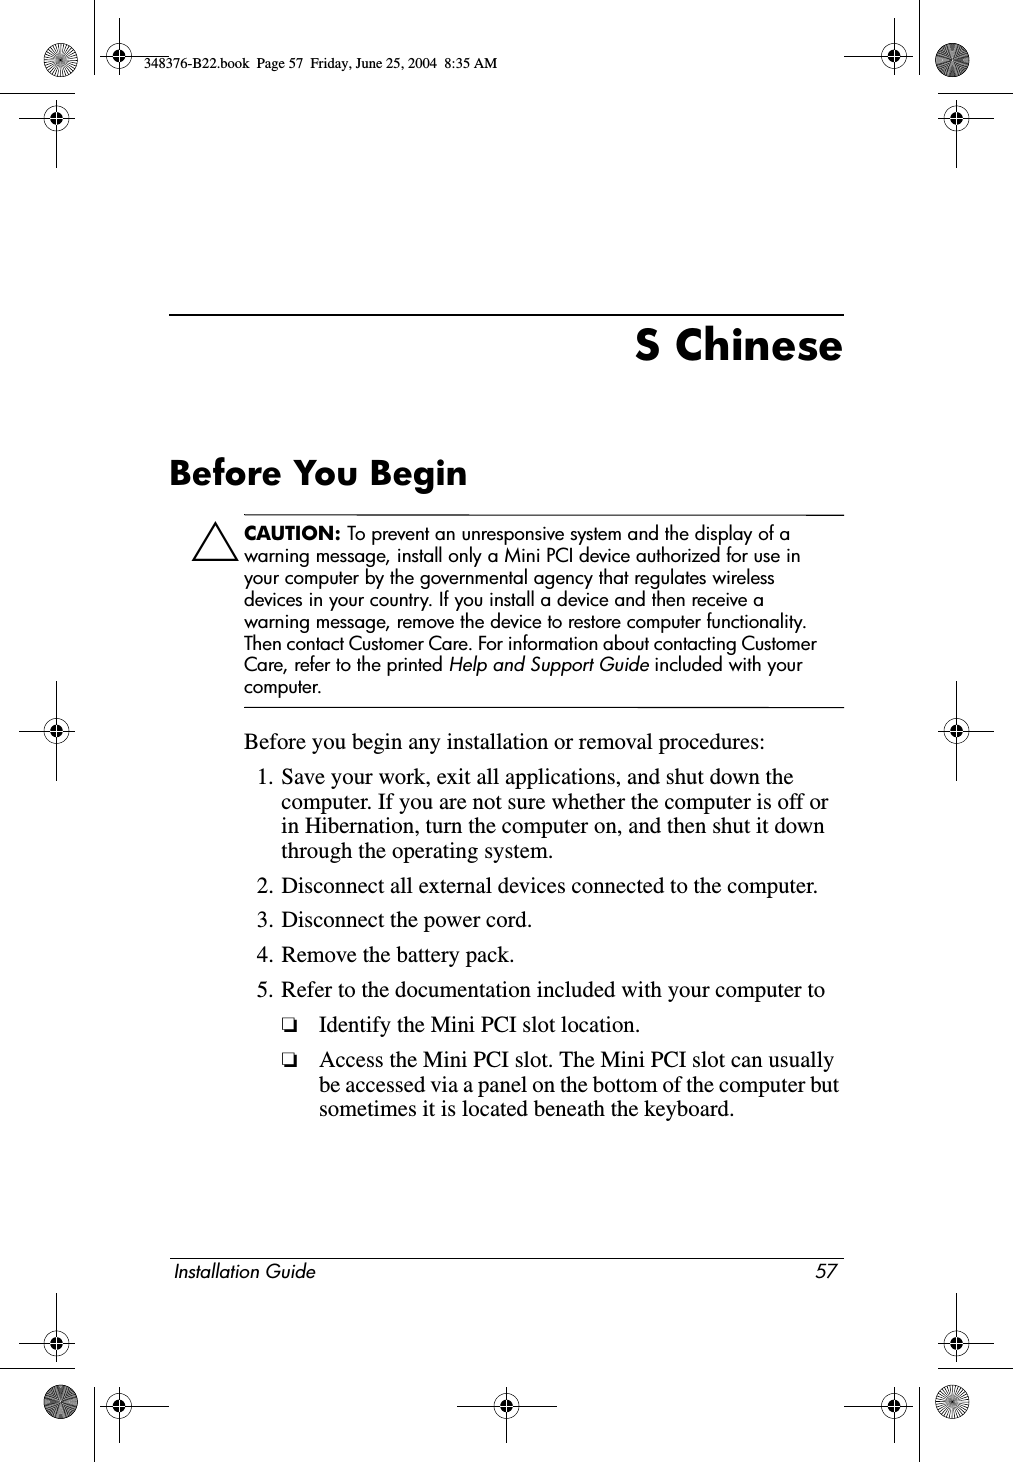 Installation Guide 57S ChineseBefore You BeginÄCAUTION: To prevent an unresponsive system and the display of a warning message, install only a Mini PCI device authorized for use in your computer by the governmental agency that regulates wireless devices in your country. If you install a device and then receive a warning message, remove the device to restore computer functionality. Then contact Customer Care. For information about contacting Customer Care, refer to the printed Help and Support Guide included with your computer.Before you begin any installation or removal procedures:1. Save your work, exit all applications, and shut down the computer. If you are not sure whether the computer is off or in Hibernation, turn the computer on, and then shut it down through the operating system.2. Disconnect all external devices connected to the computer.3. Disconnect the power cord.4. Remove the battery pack.5. Refer to the documentation included with your computer to❏Identify the Mini PCI slot location.❏Access the Mini PCI slot. The Mini PCI slot can usually be accessed via a panel on the bottom of the computer but sometimes it is located beneath the keyboard.348376-B22.book  Page 57  Friday, June 25, 2004  8:35 AM